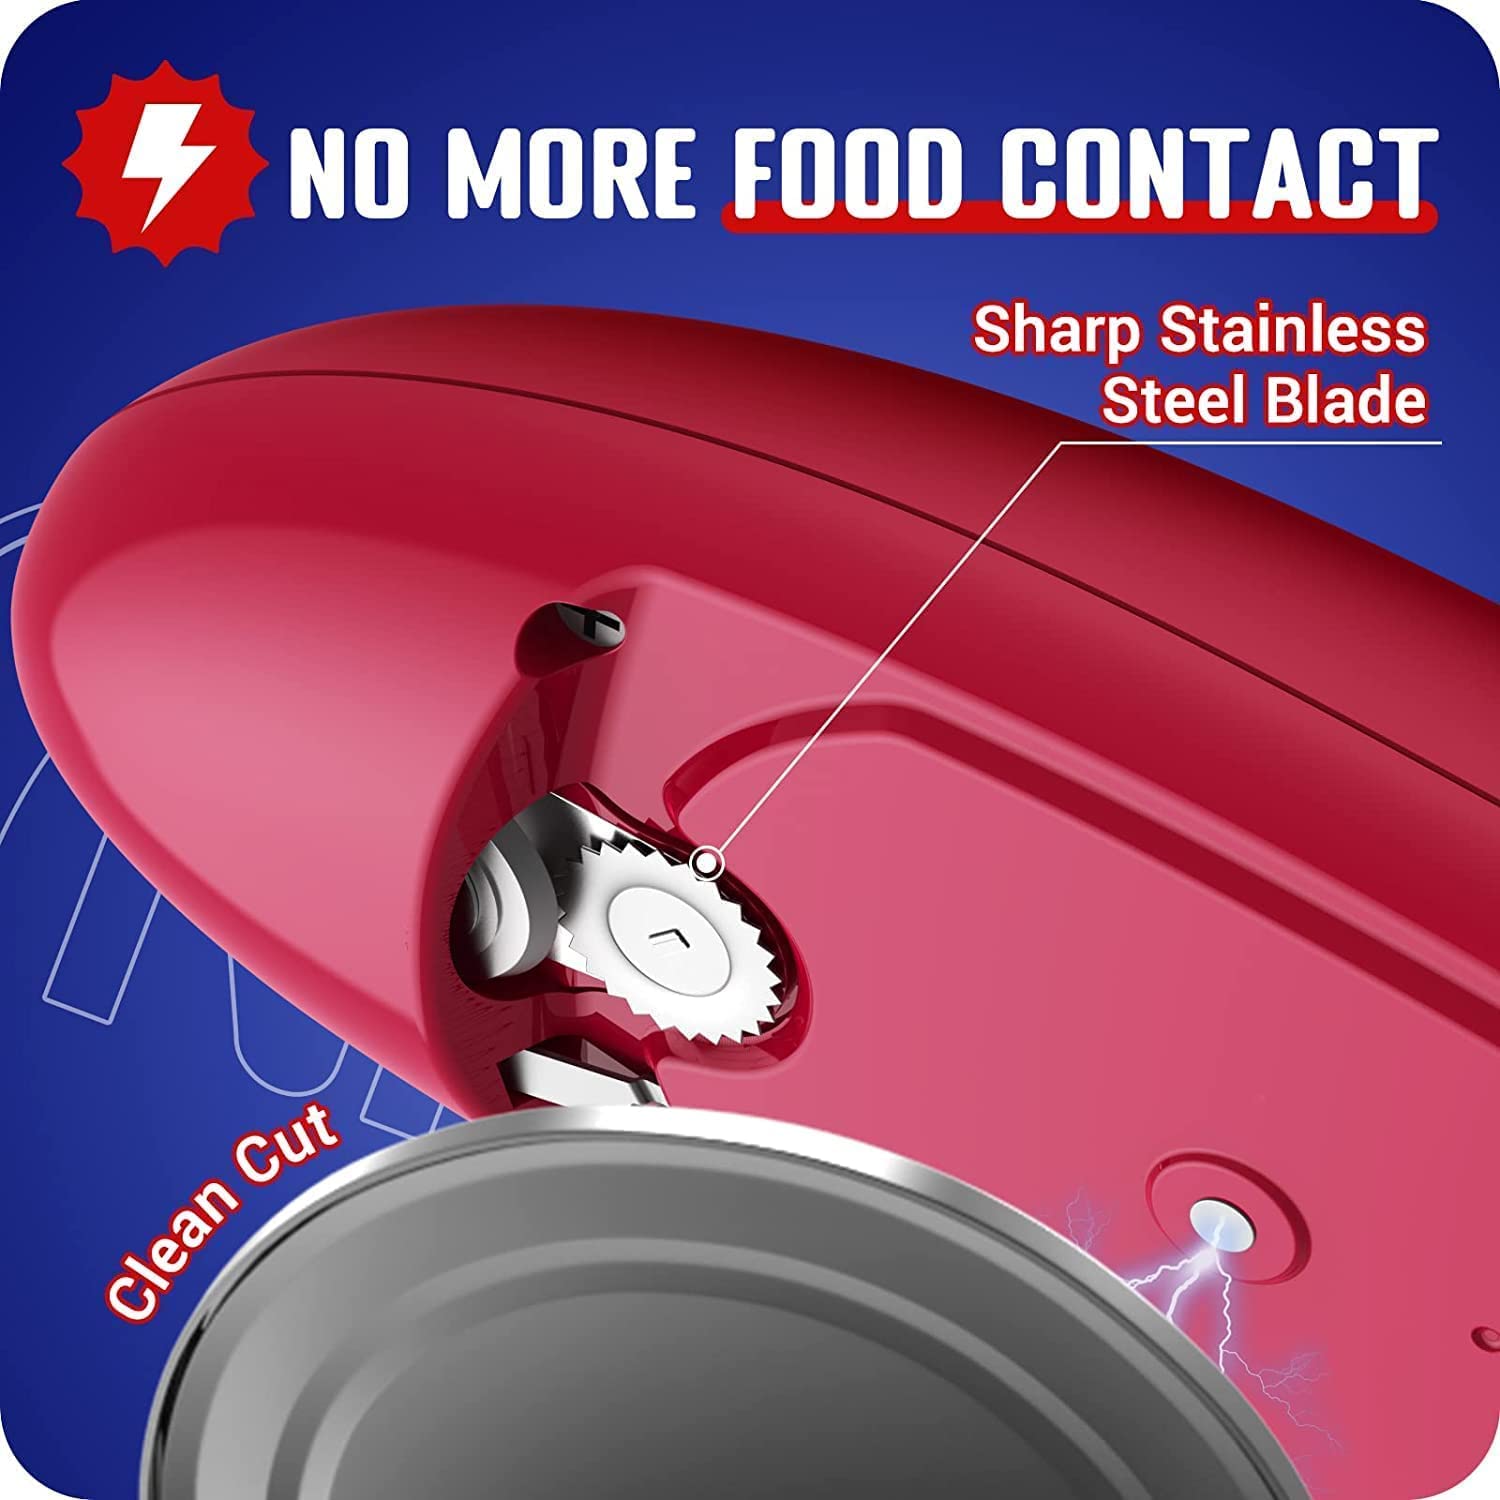 Electric Can Opener, Open Your Cans with A Simple Push of Button, Battery Operated Automatic Can Opener Smooth Edges, Hand Free Can Opener, Best Kitchen Gadget for Chefs, Arthritis and Seniors